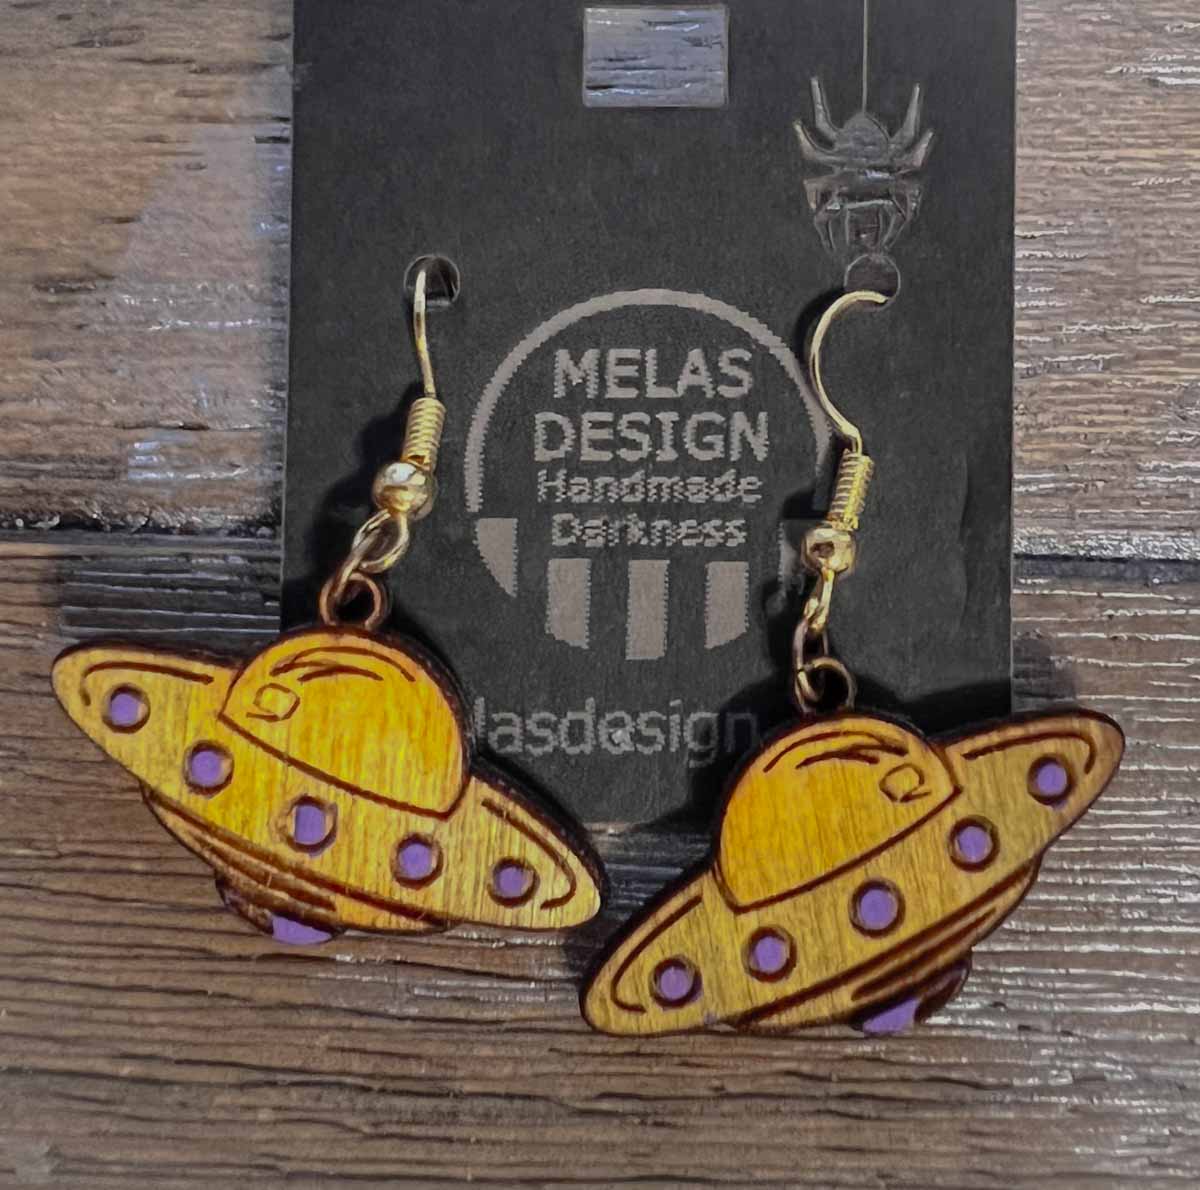 Classic UFO Earrings for Sci-fi Fans Simple; UFO earrings; dangle; drop; Melasdesign Handmade; Thomas WV; Cryptid Collection; small business